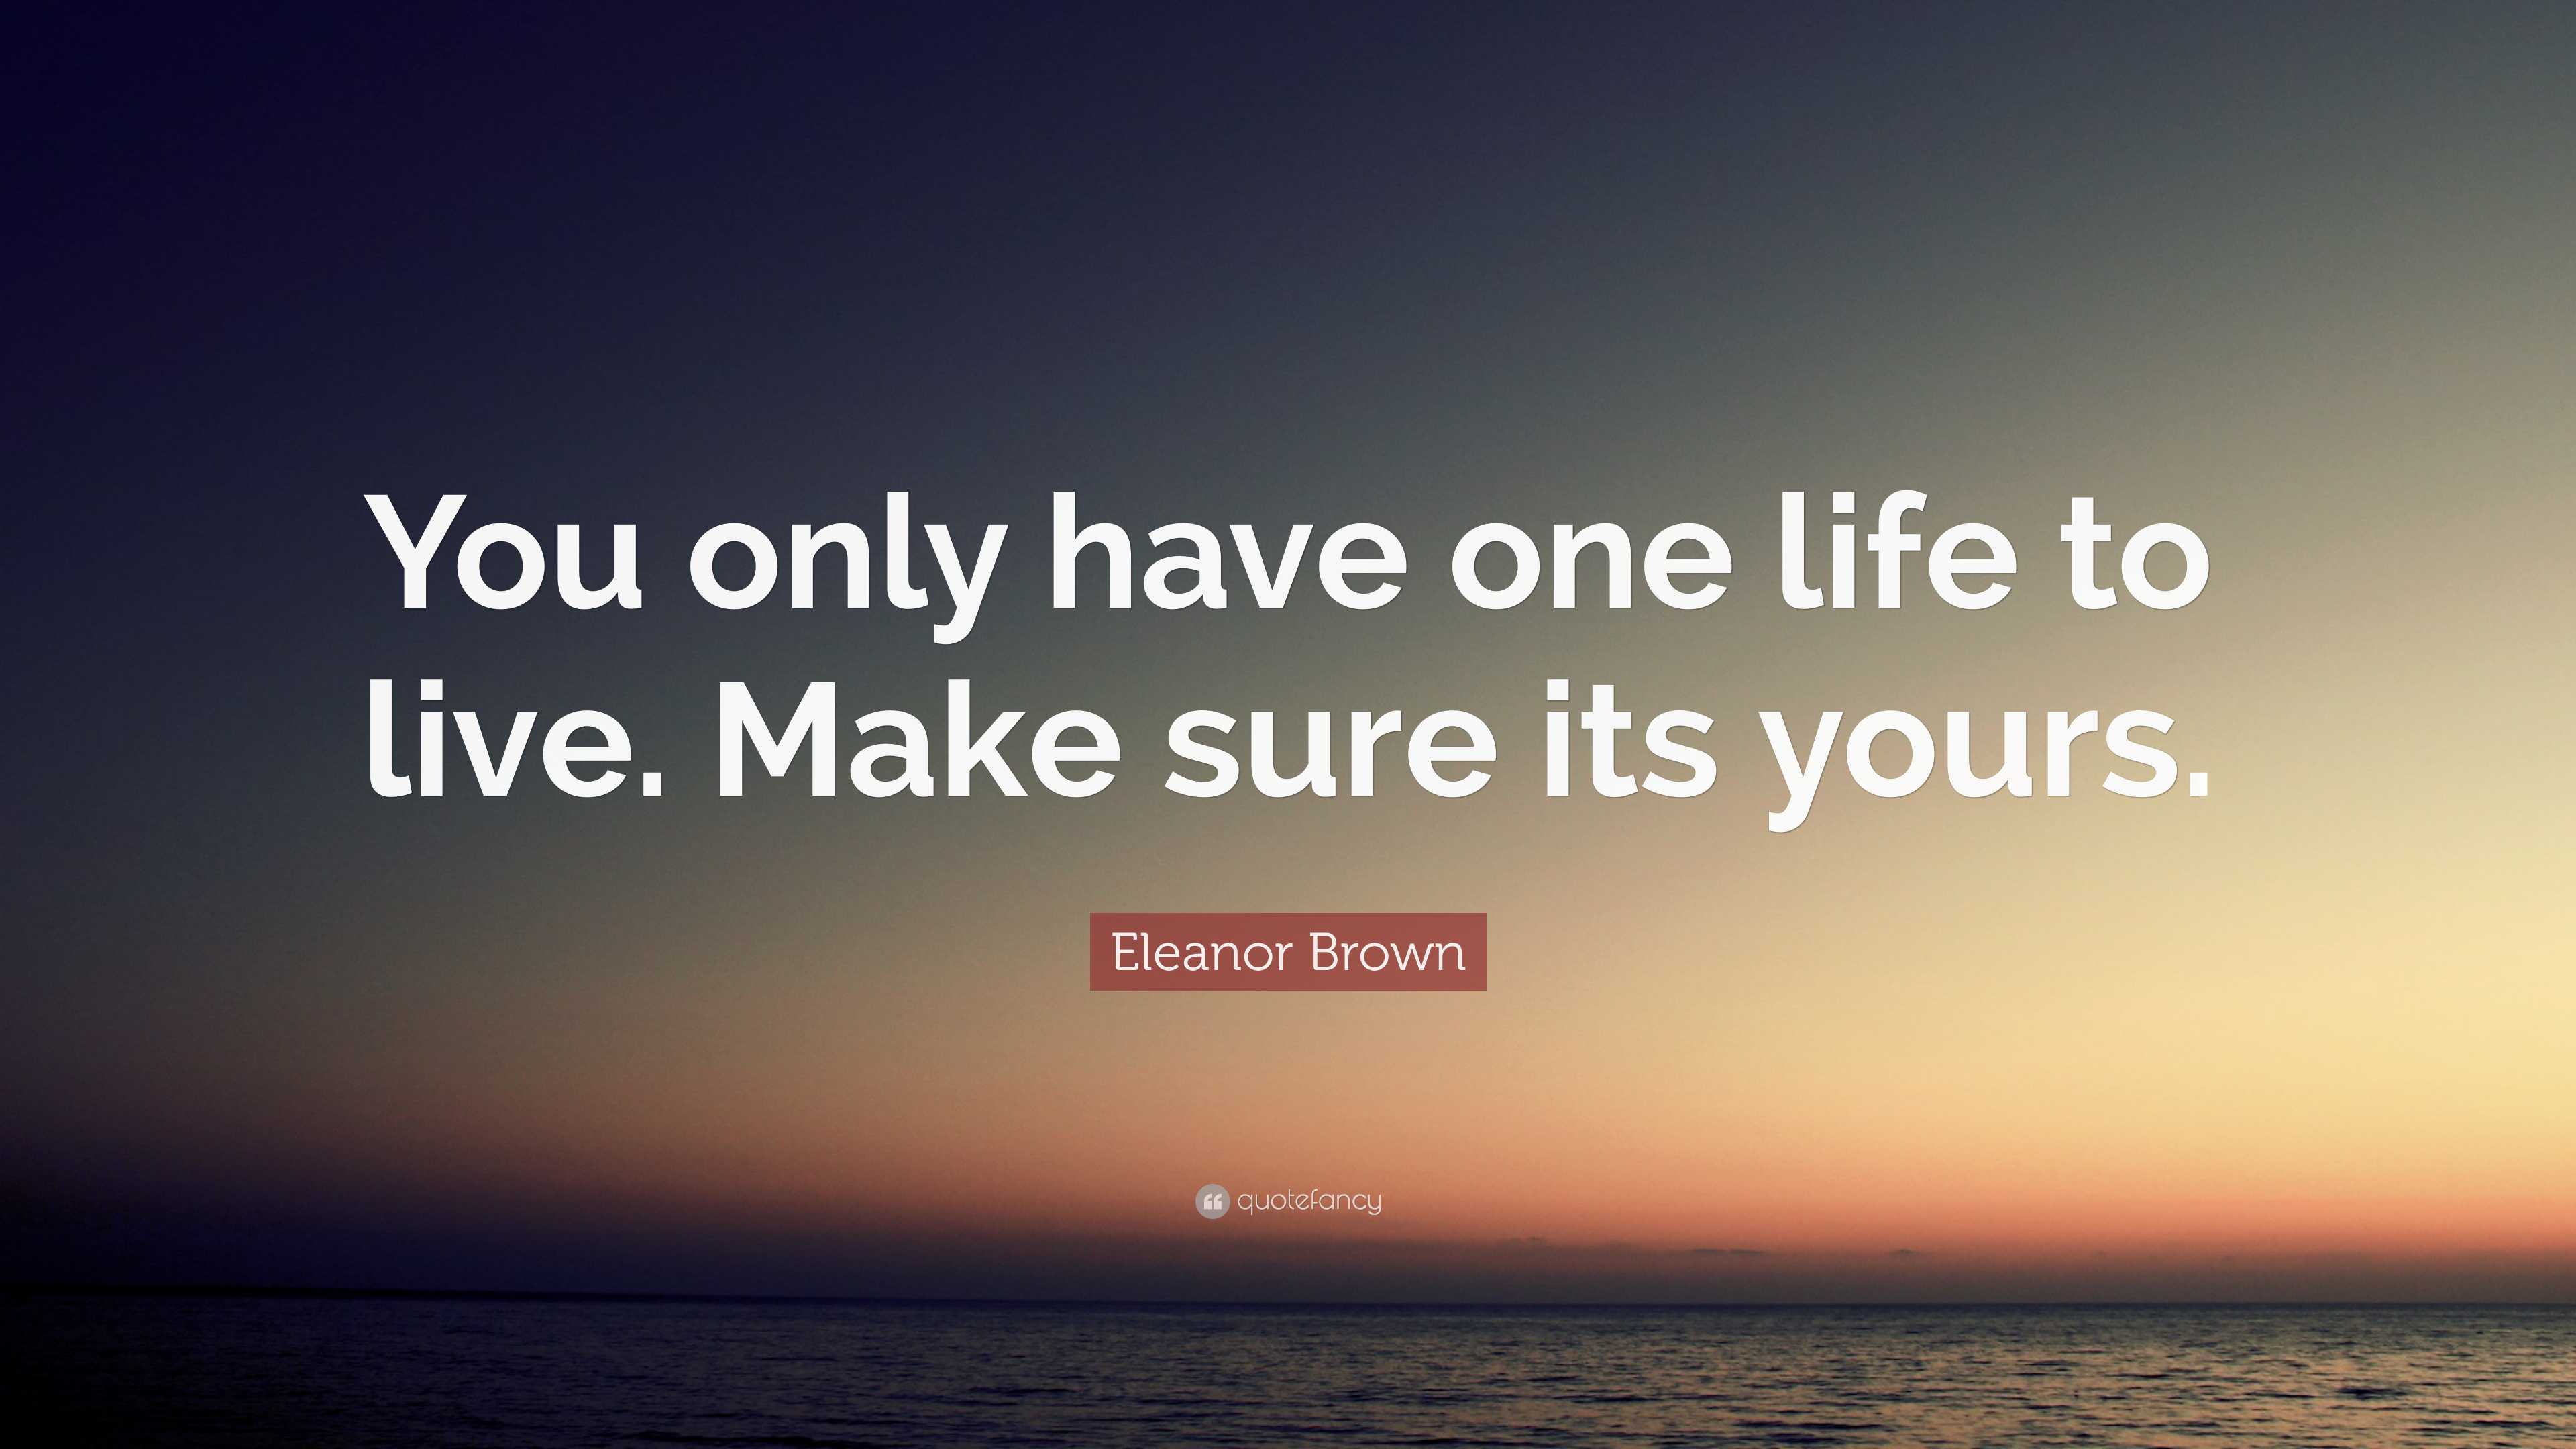 Eleanor Brown Quote: “You only have one life to live. Make sure its yours.”